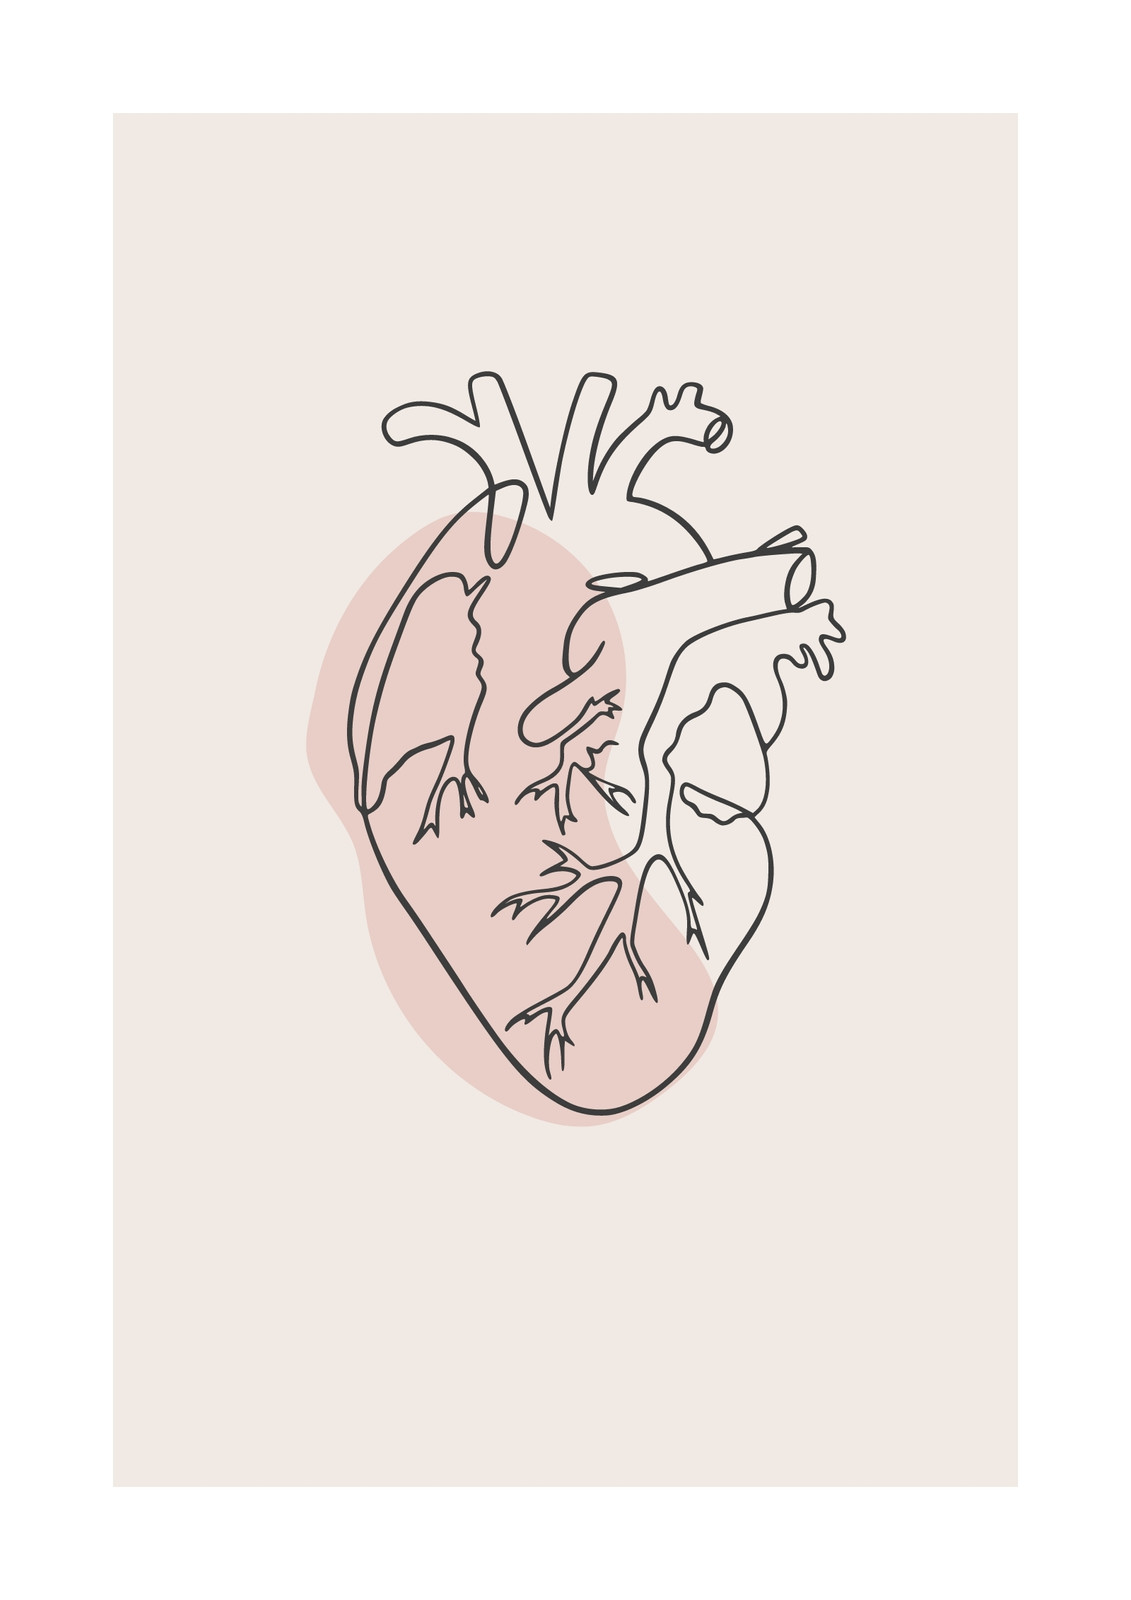 55700 Anatomical Heart Stock Photos Pictures  RoyaltyFree Images   iStock  Anatomical heart illustration Anatomical heart icon Anatomical  heart vector